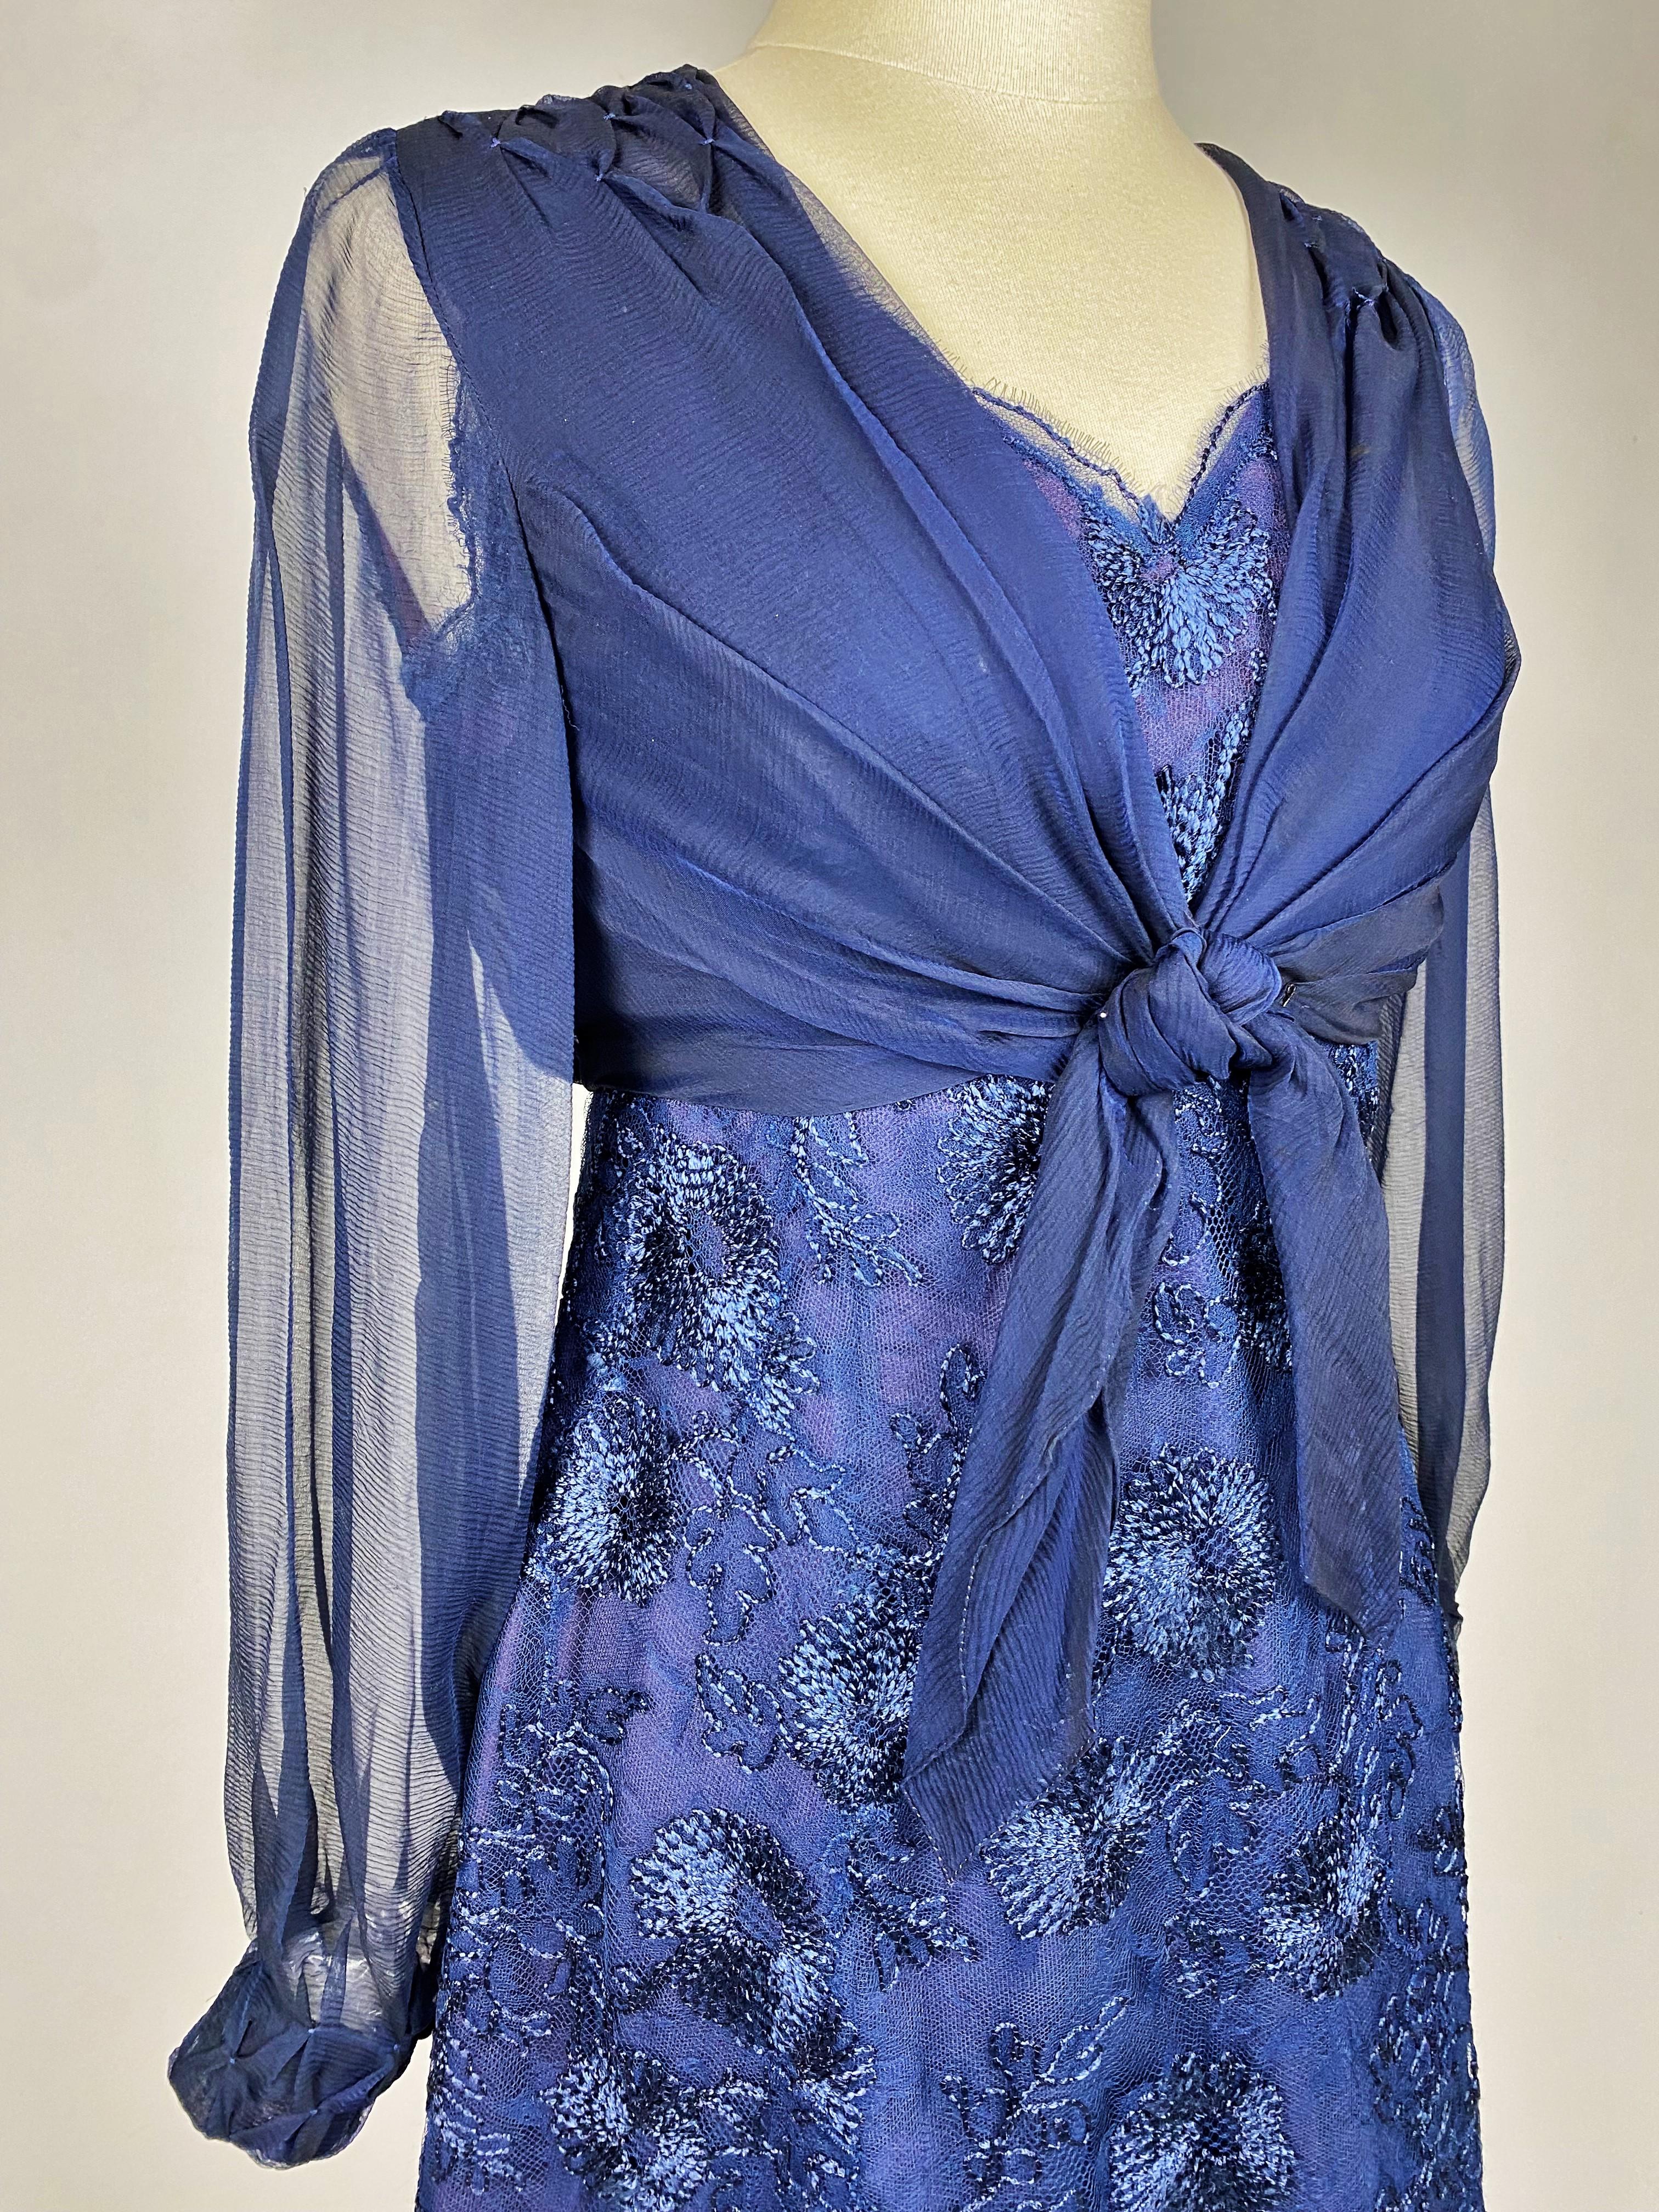 Circa 1965

France

Cocktail dress in navy silk tulle embroidered with floche silk and its bolero by Jacques Heim Jeune Fille directed by Jacqueline Citroën and dating from the 1960s.  Short dress, sleeveless, V-neck and zip in the back.